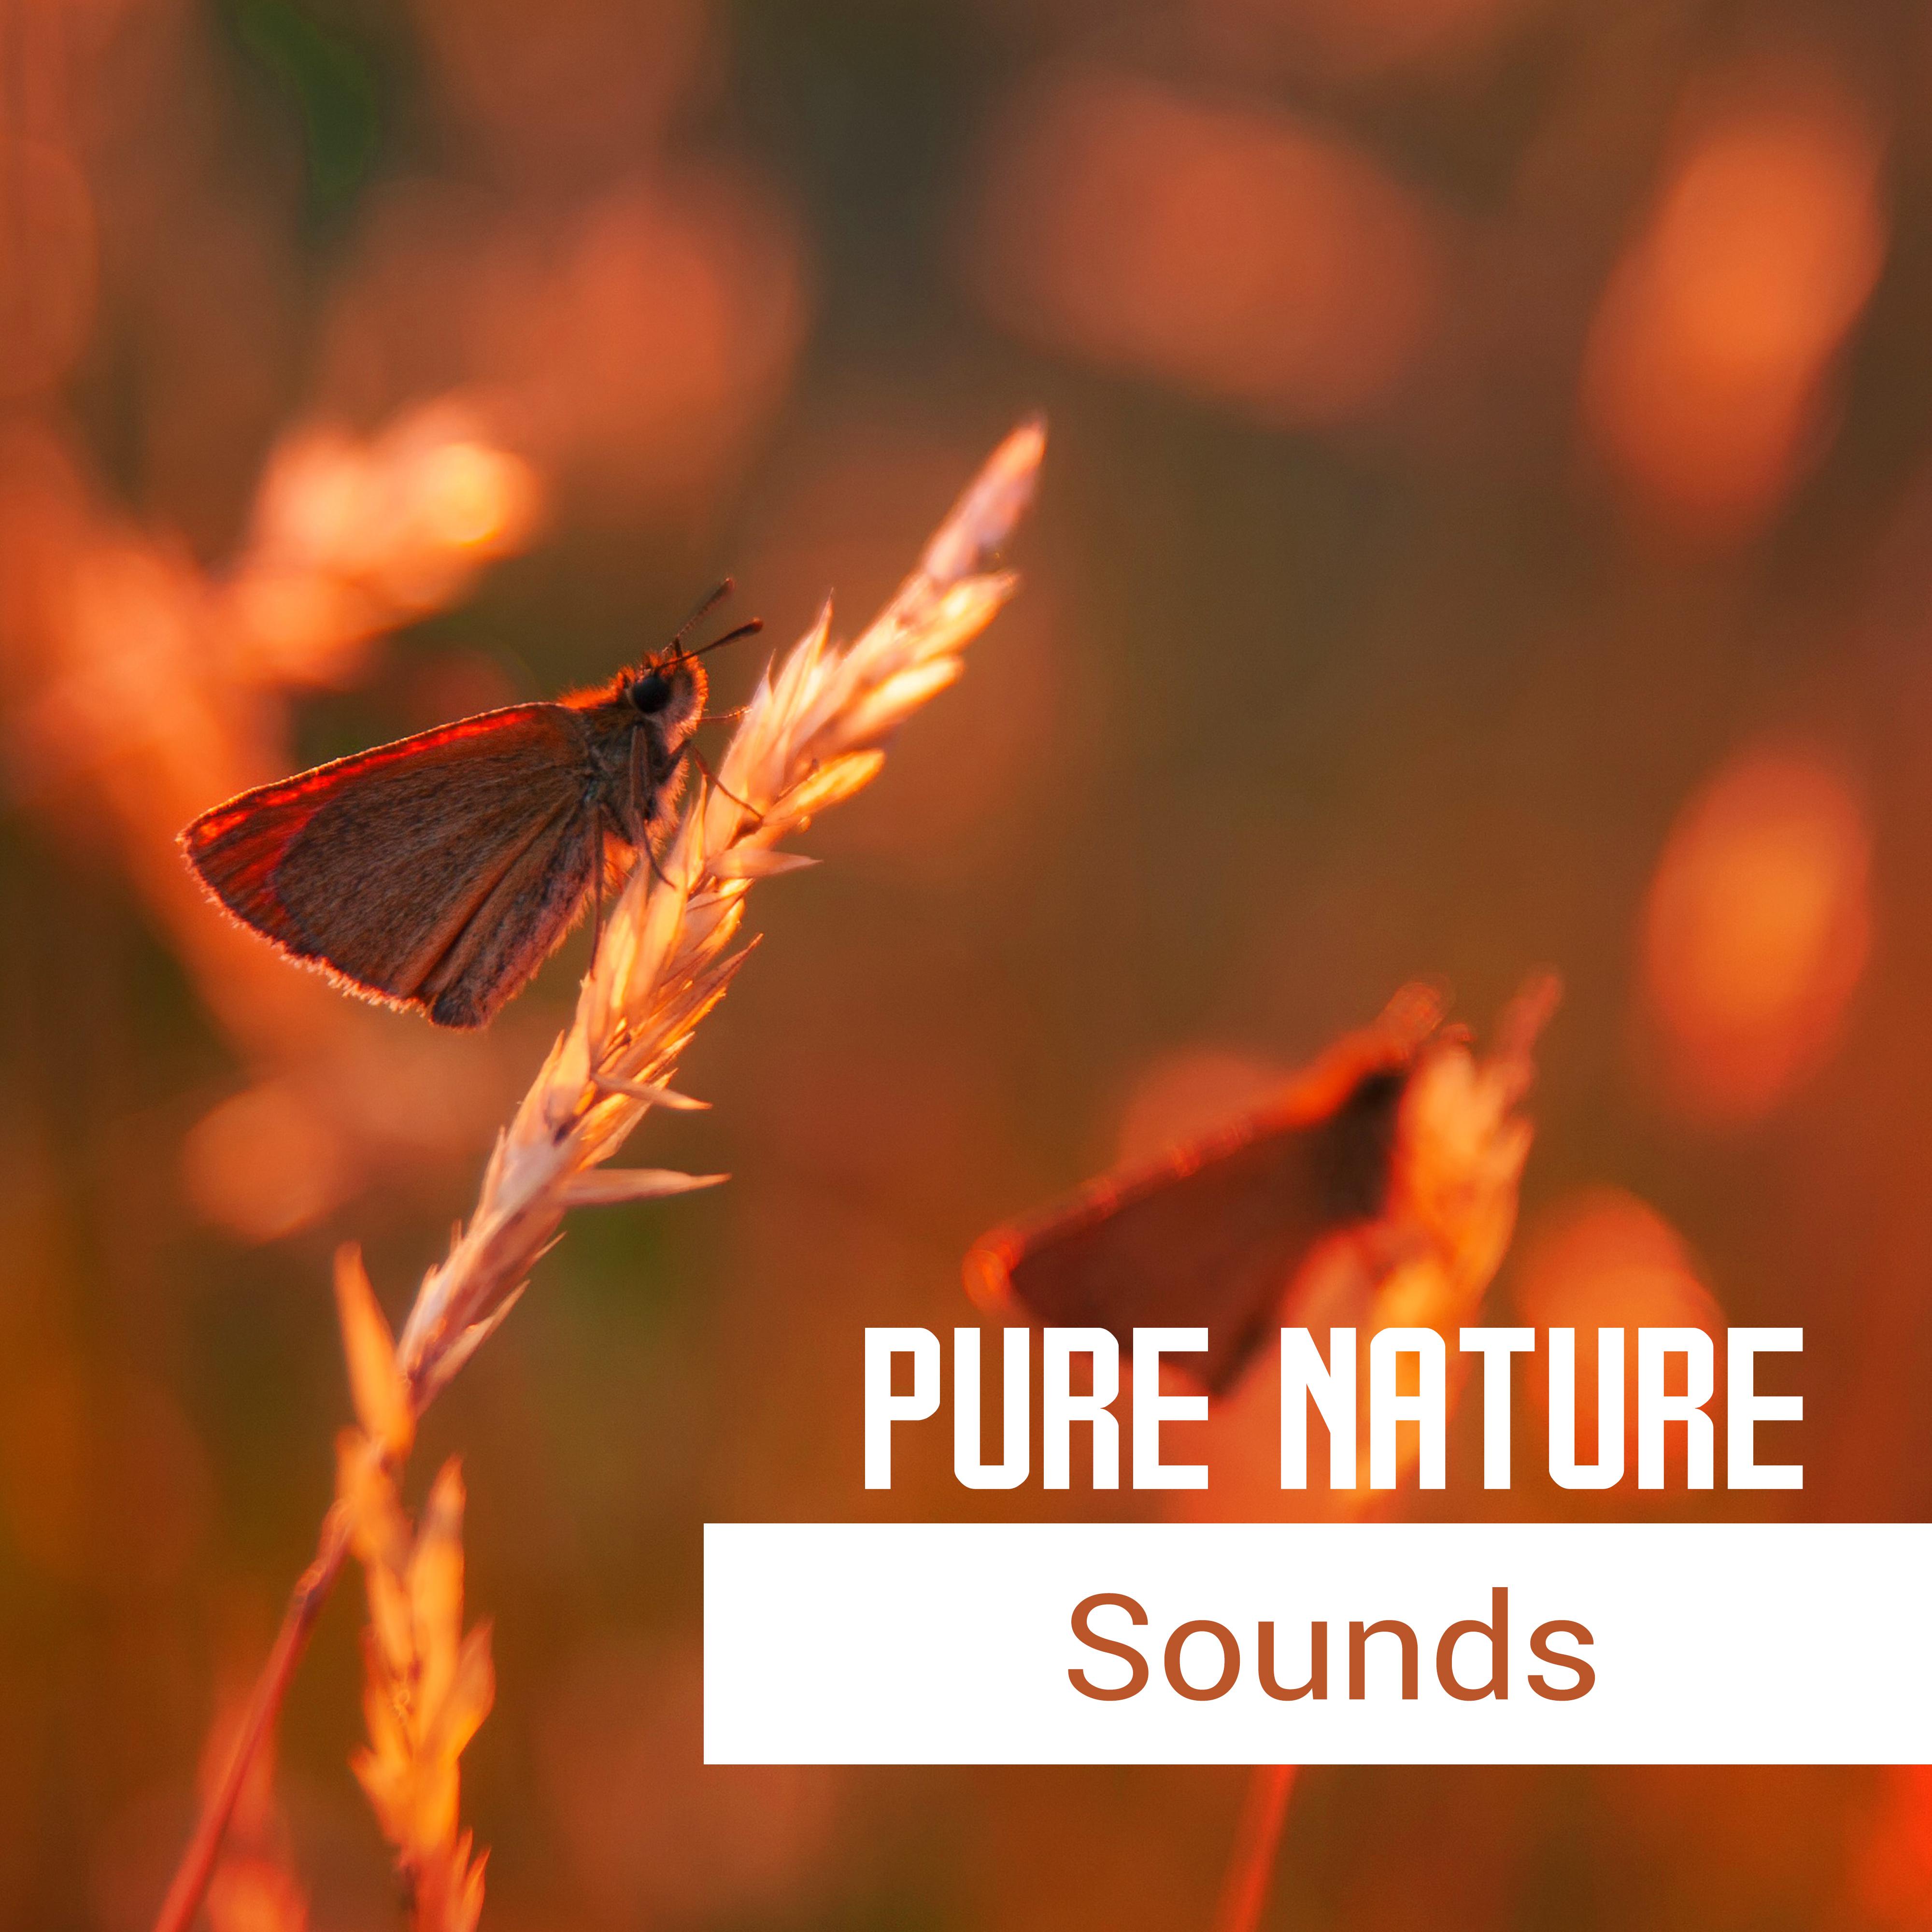 Pure Nature Sounds  Calming Songs for Relax, Stress Relief, Reduce Anxiety, New Age for Healing Nerves